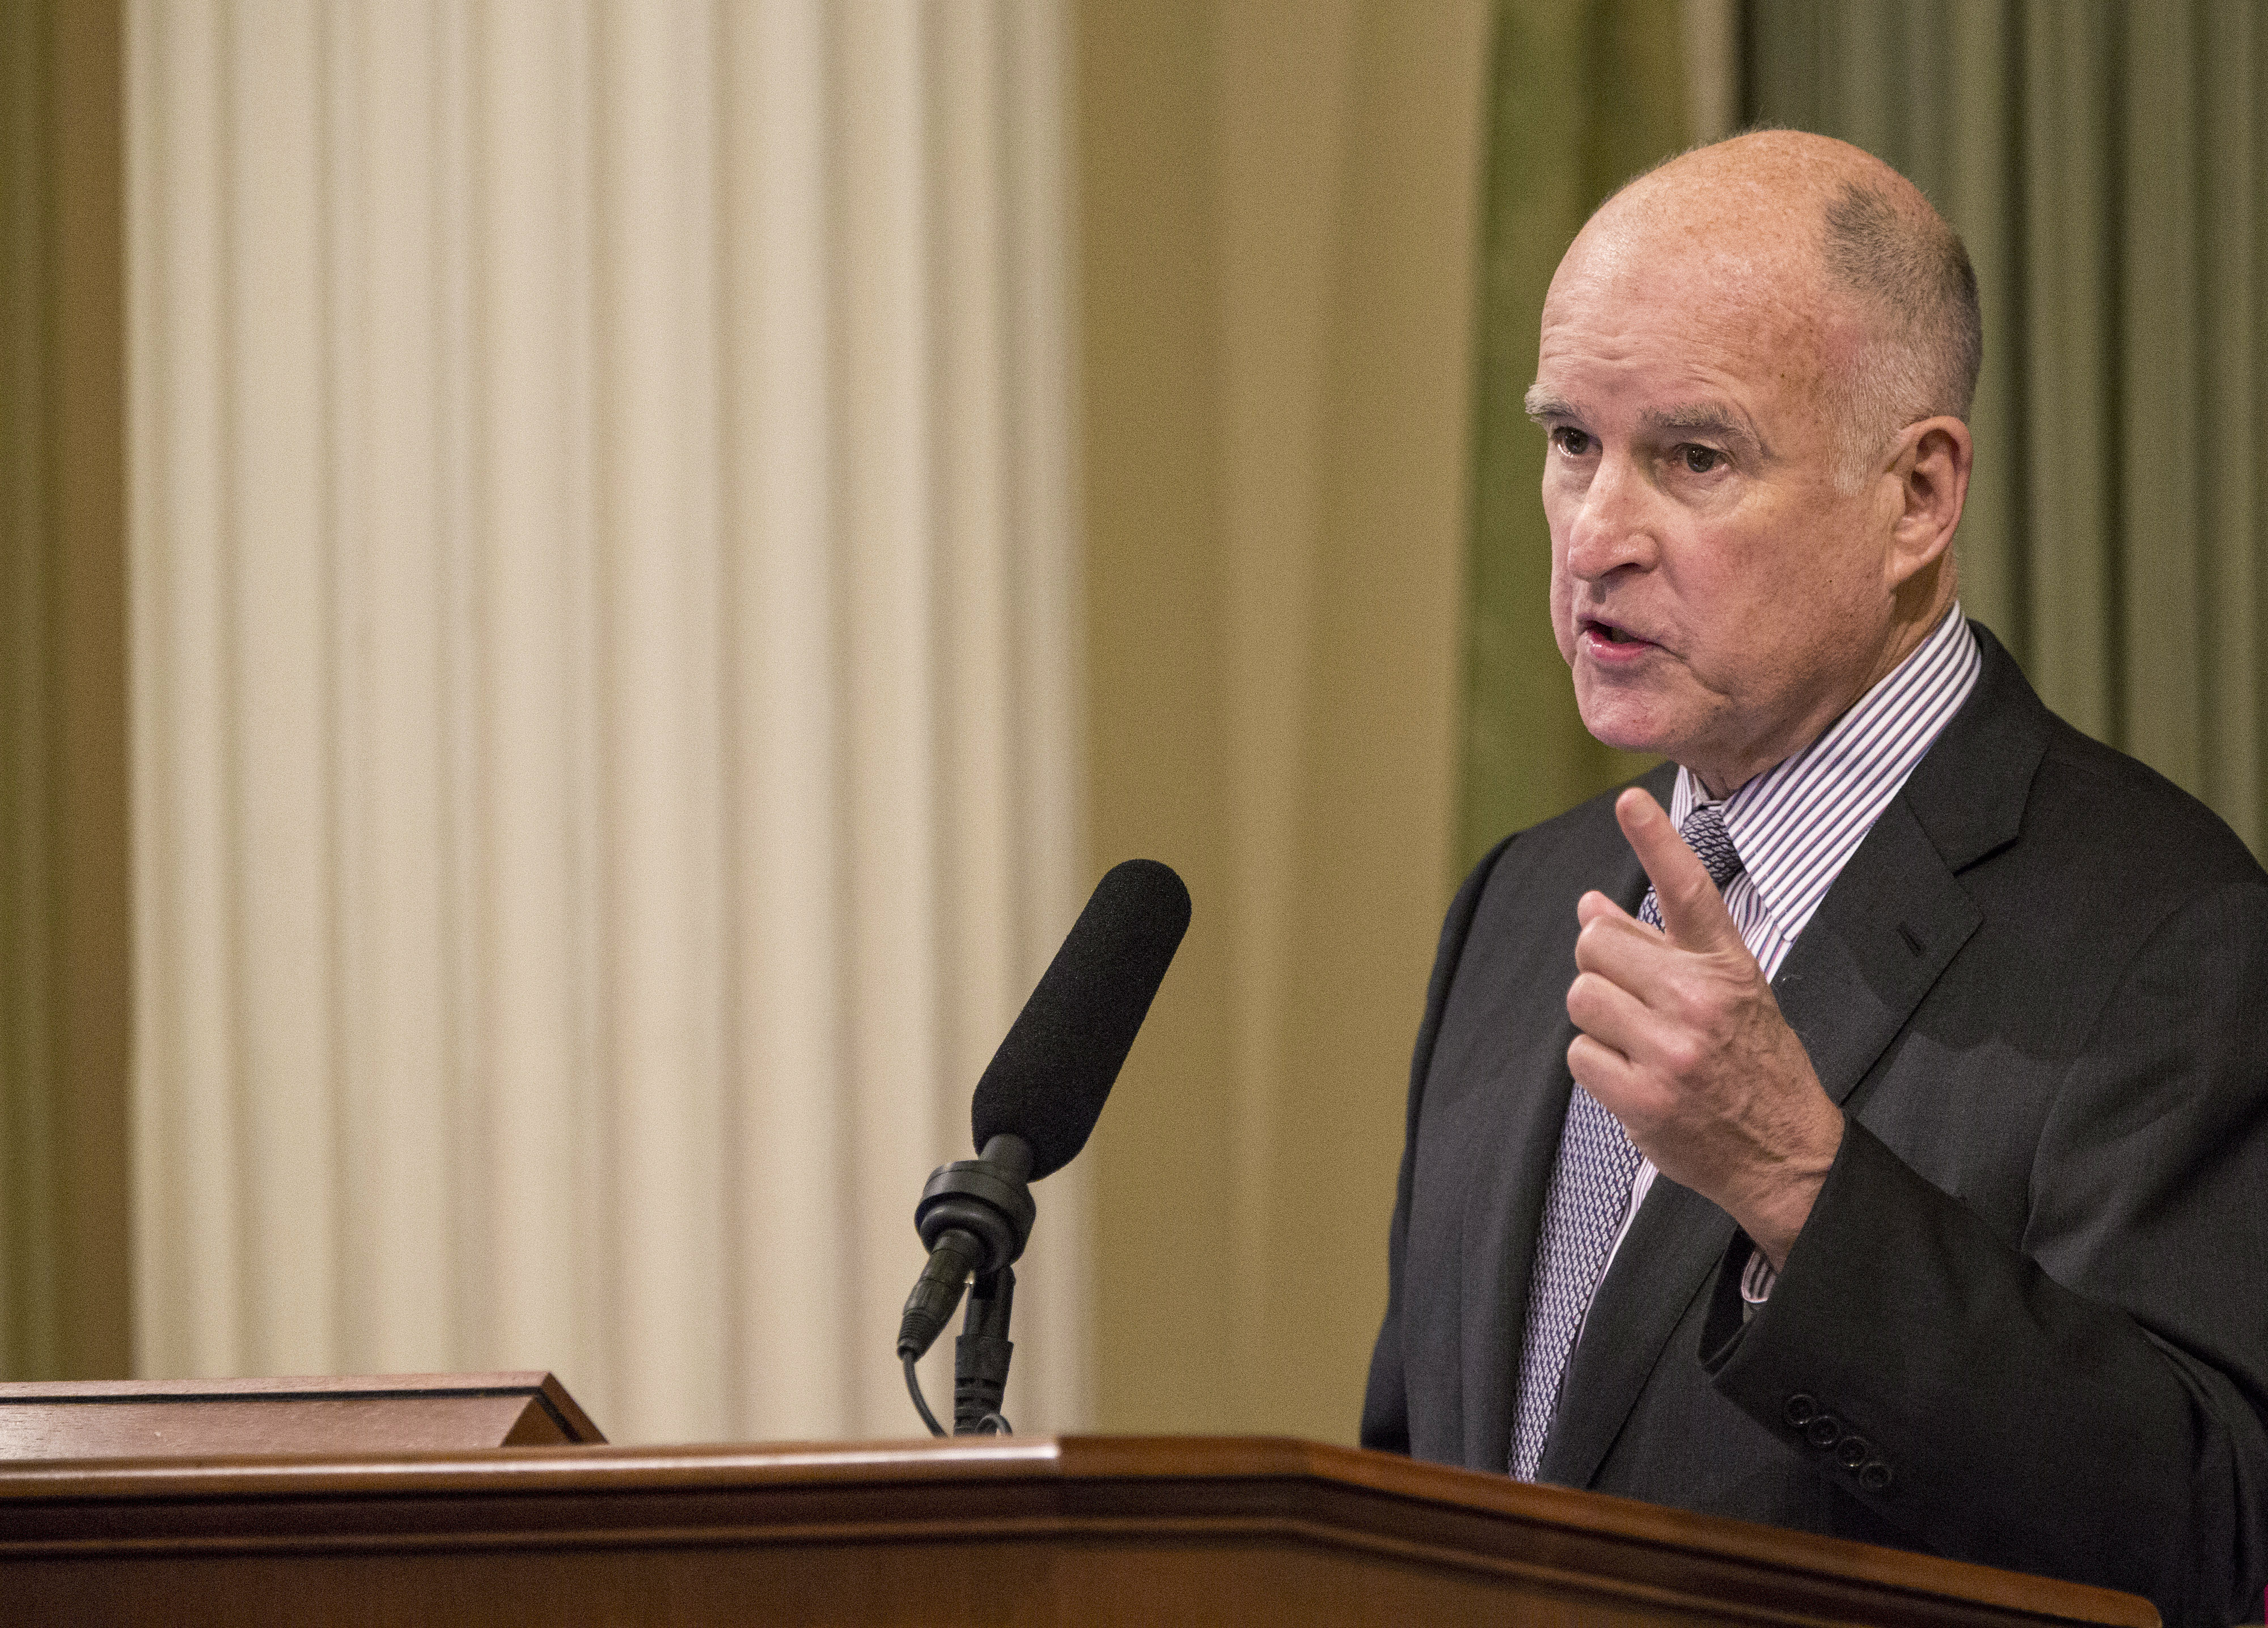 Jerry Brown, governor of California, delivers the State of the State address before a joint session of the legislature at the State Capitol in Sacramento, California, U.S., on Thursday, Jan. 21, 2016. (Ken James&mdash;Bloomberg/Getty Images)